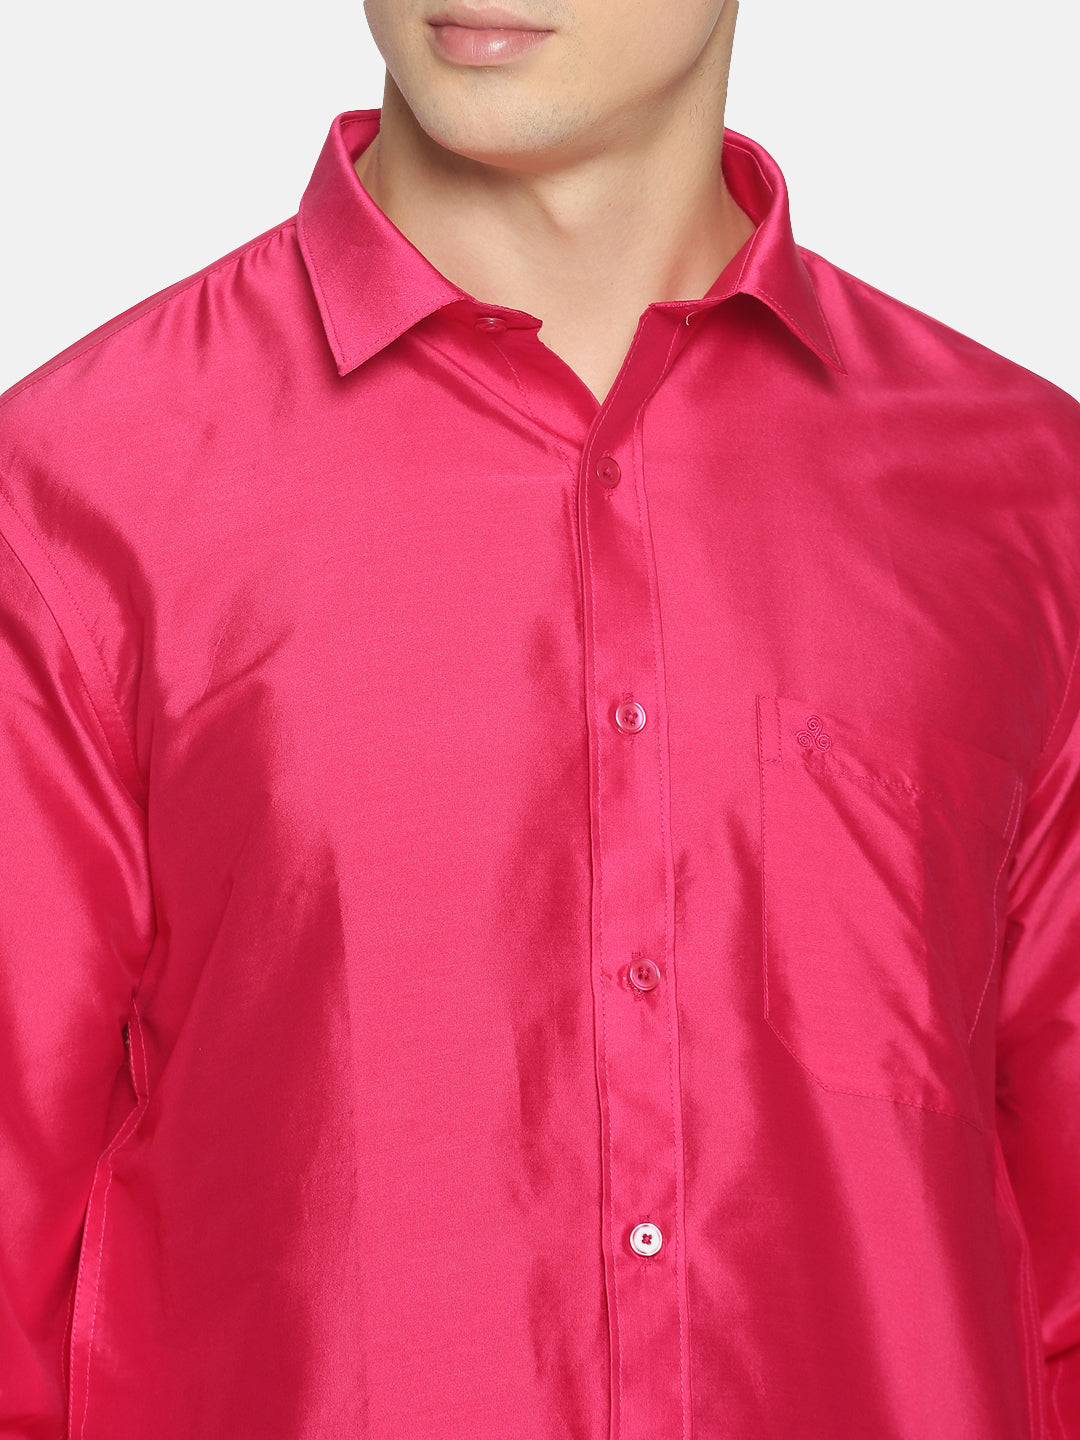 Fushsia Polyester Slim Fit Solid Party Shirt